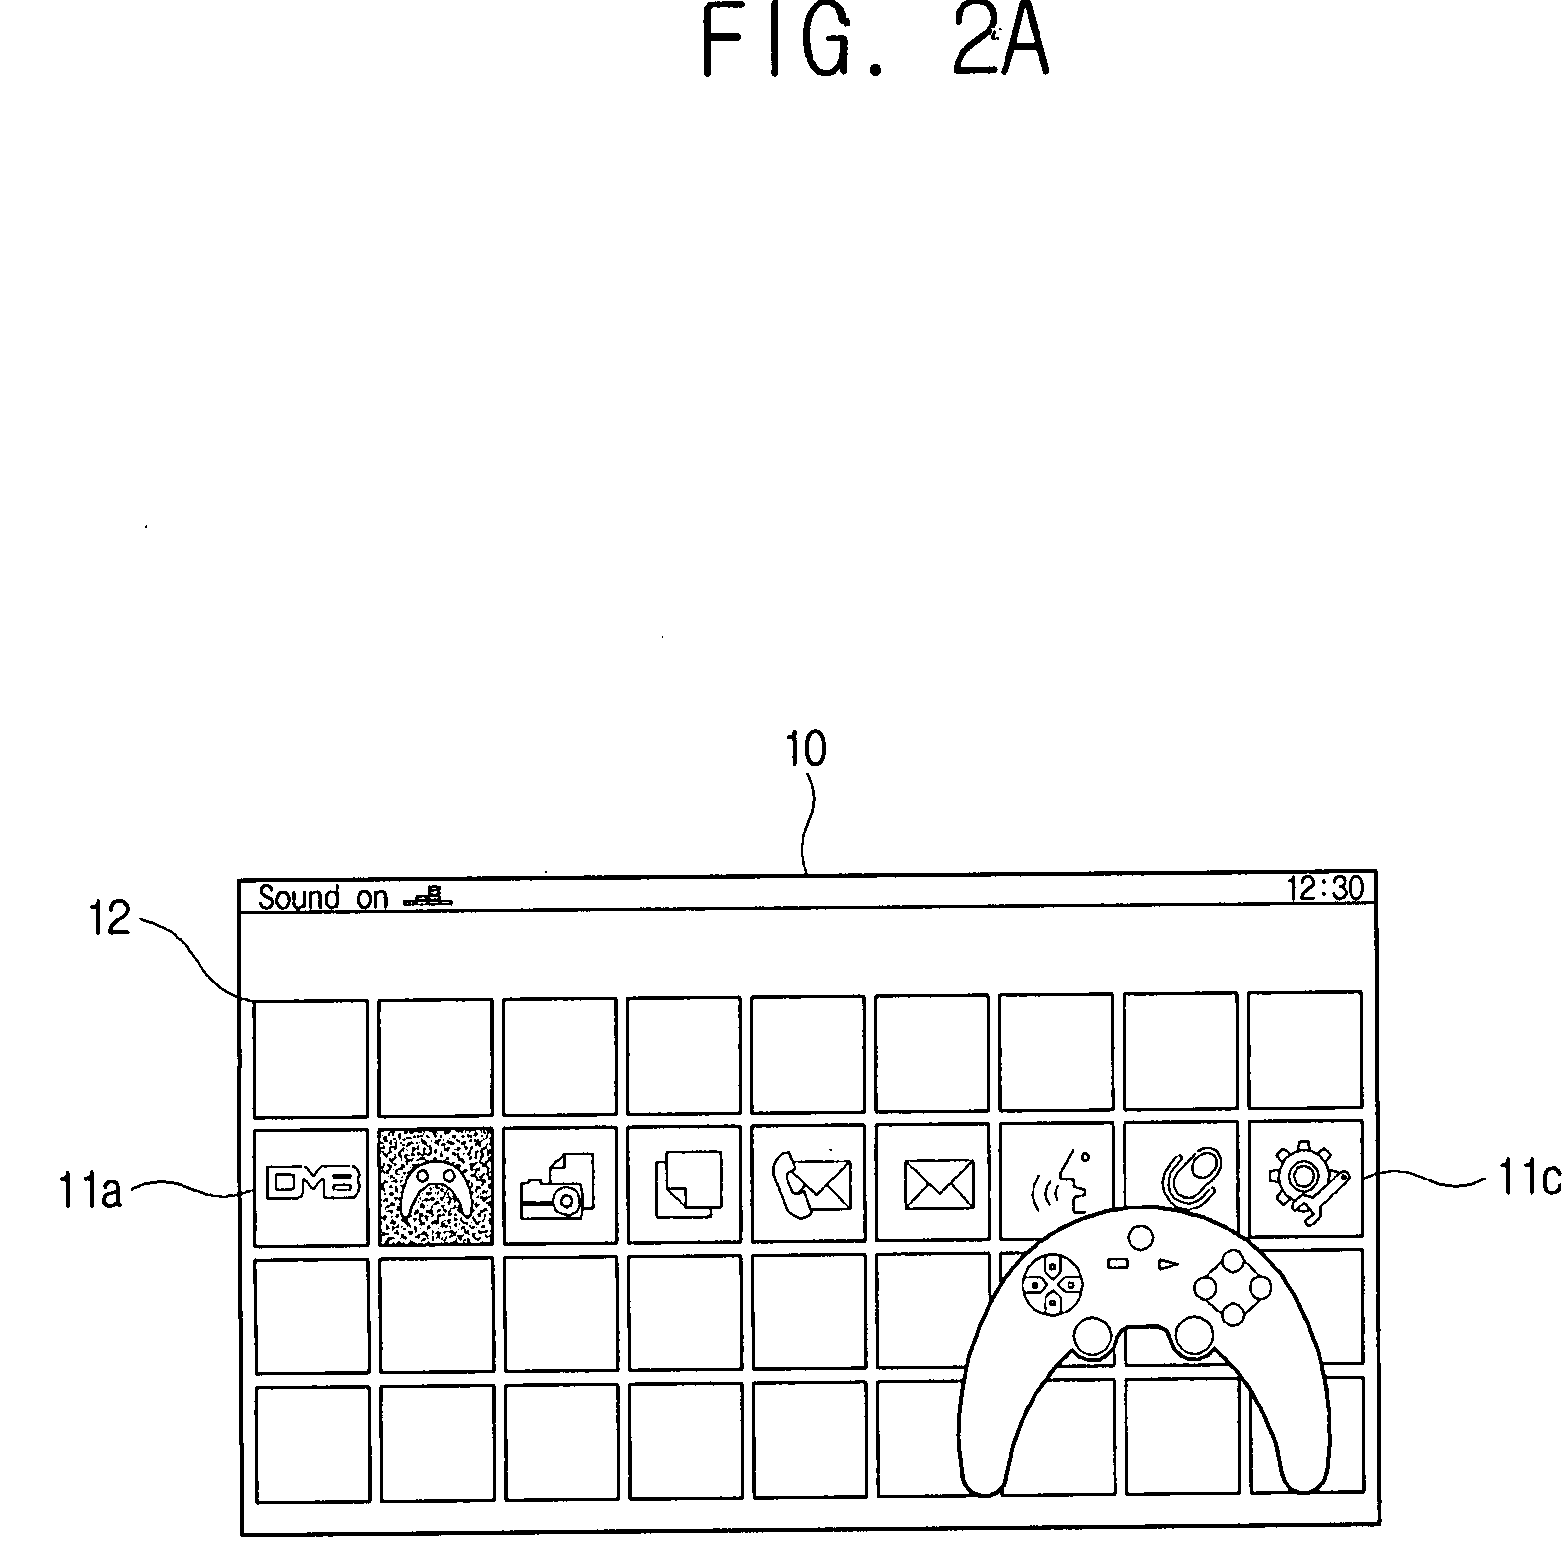 Display apparatus and image processing apparatus with flexible menu items and control method thereof